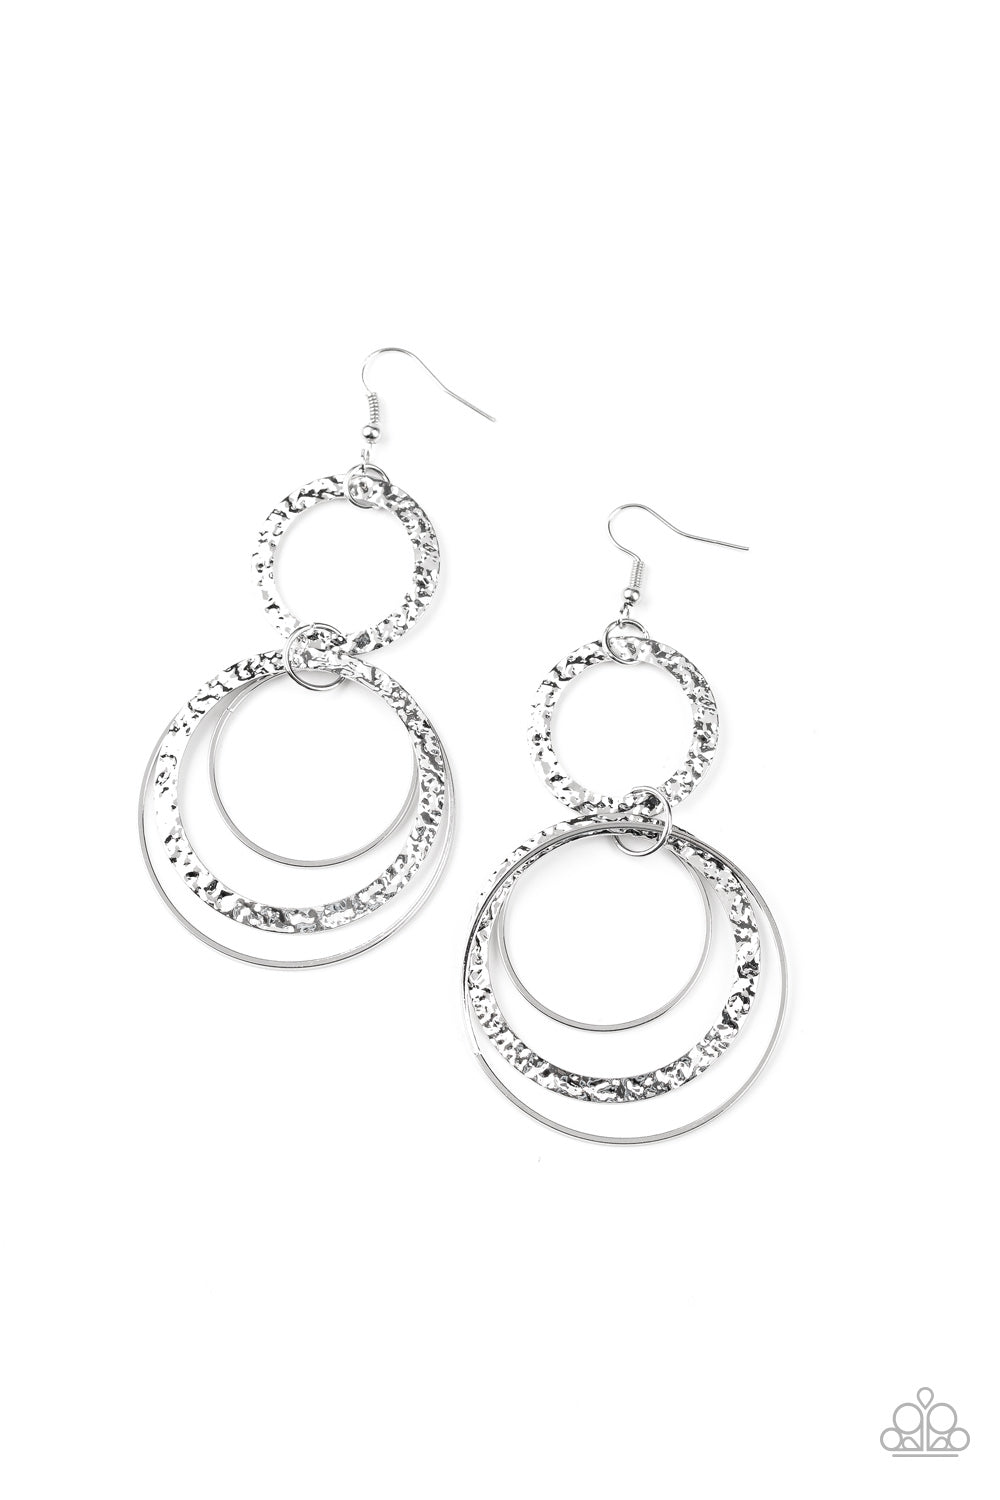 Paparazzi Eclipsed Edge - Silver Earrings - A Finishing Touch 